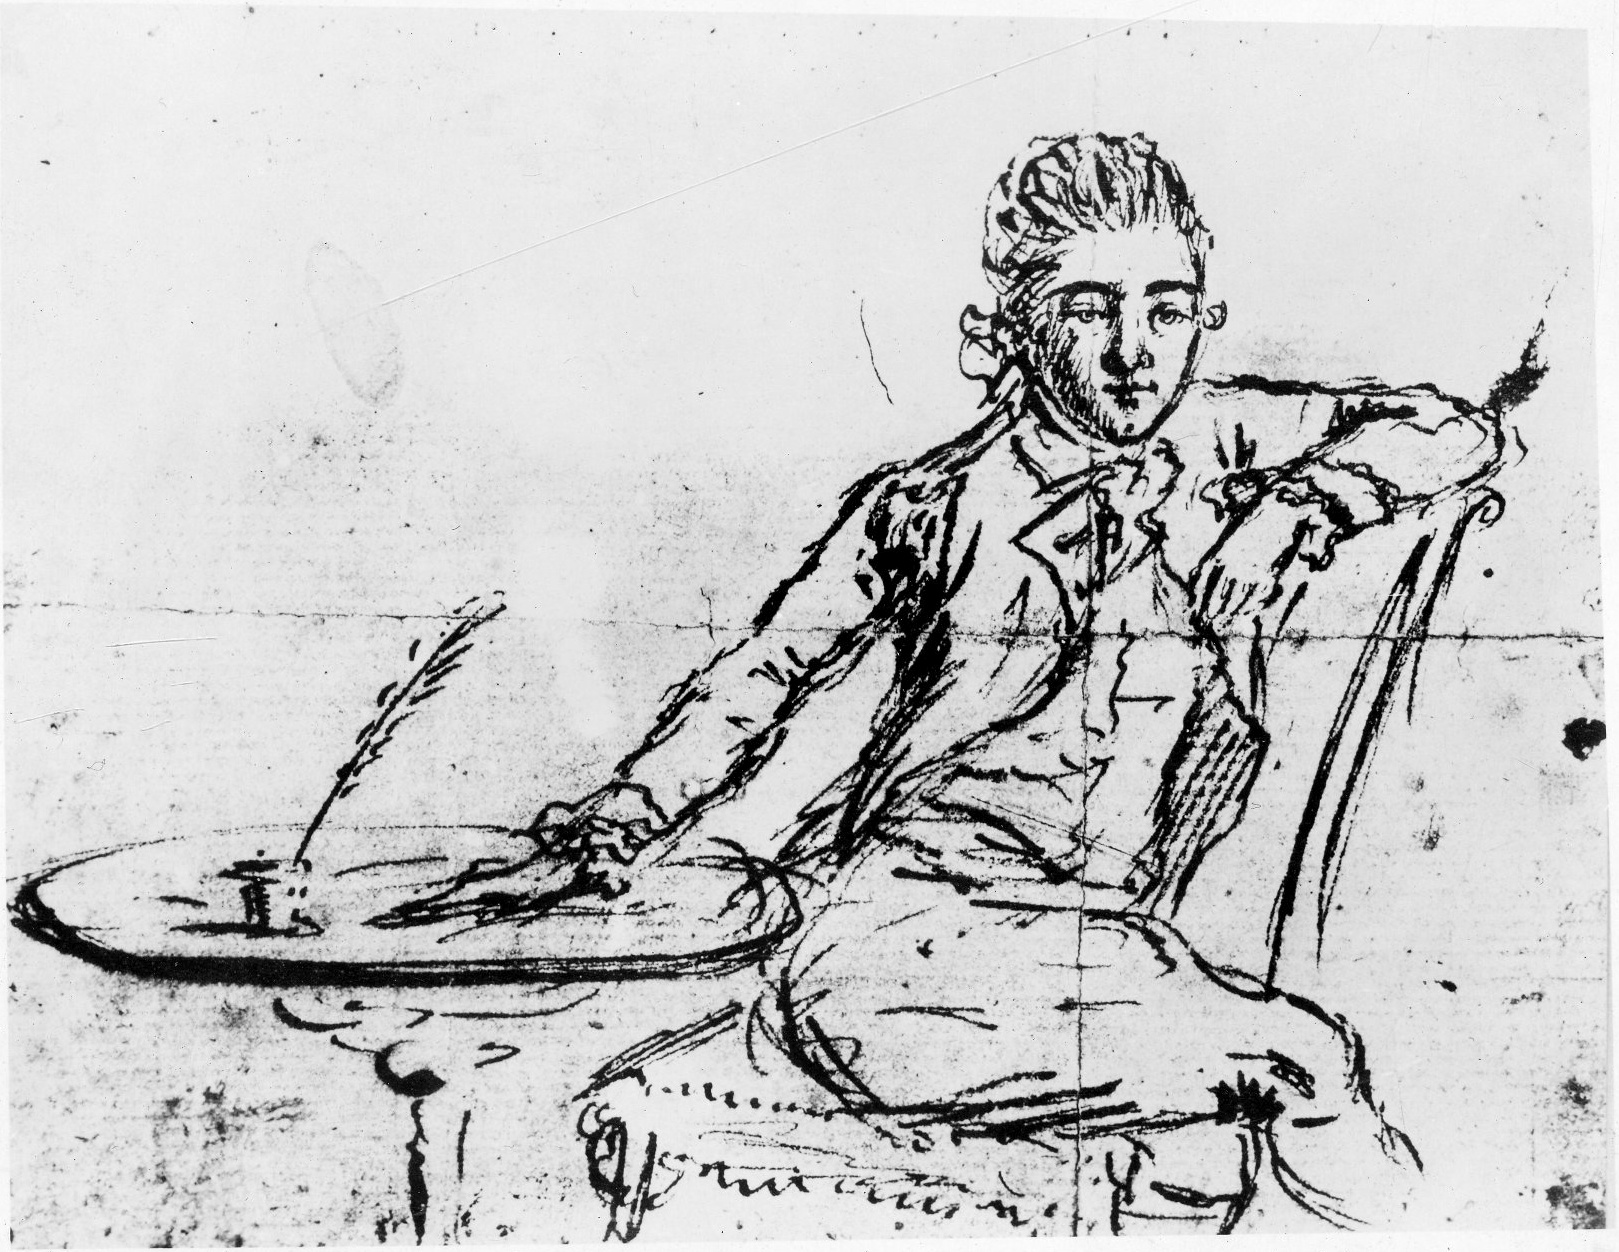 John André sketched this self-portrait on the night before his hanging. Throughline Theatre’s ‘André’ traces the events and debates that led to that fate. (image: Yale University Gallery)